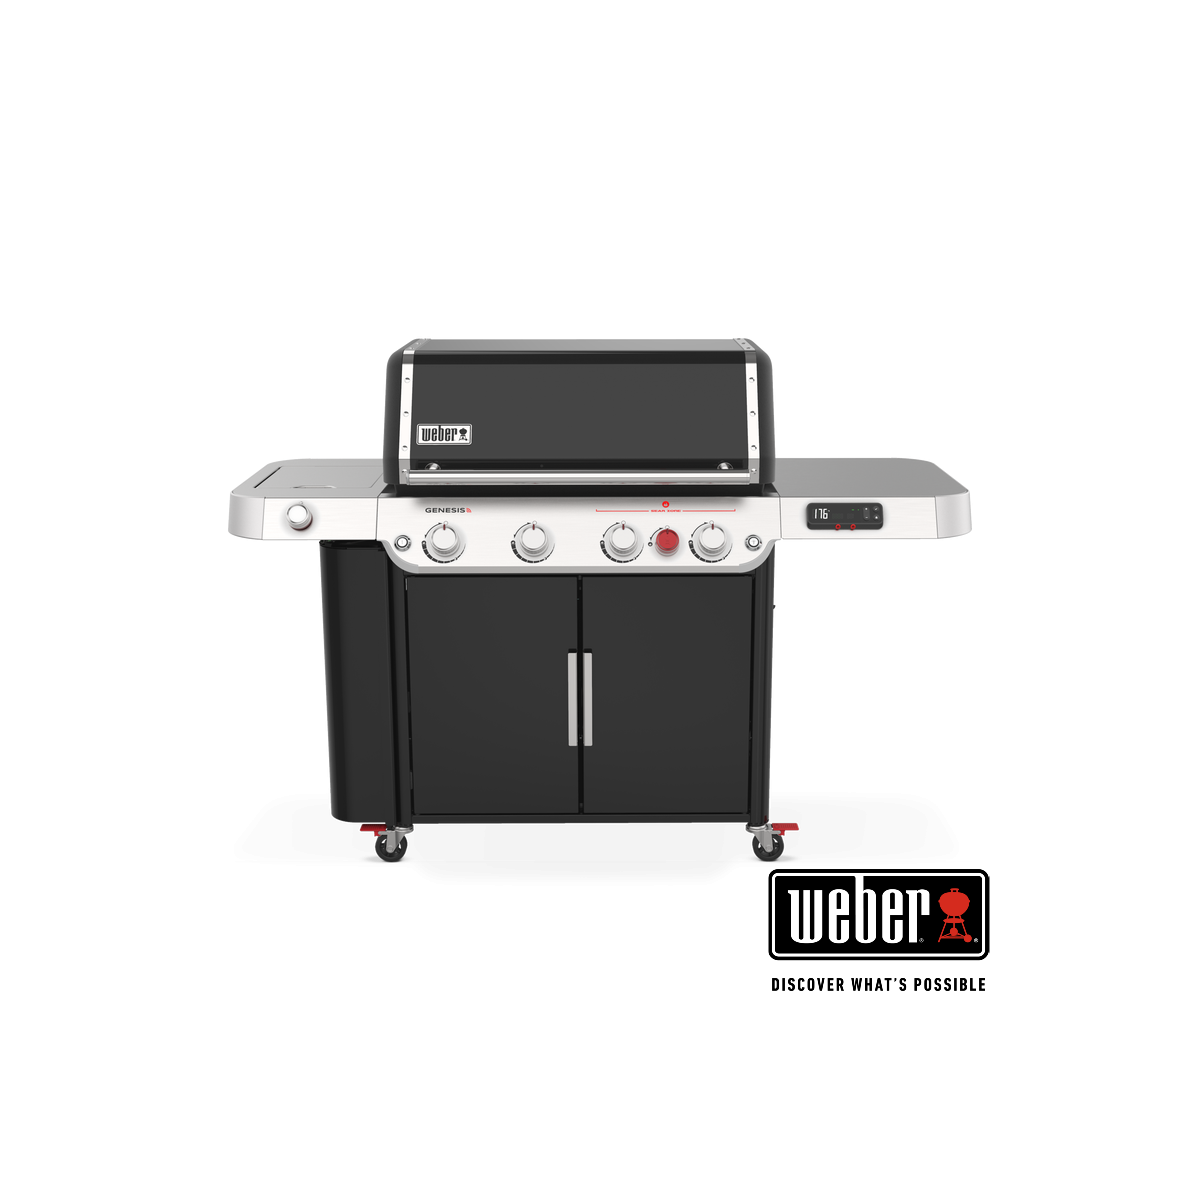 WEBER GENESIS EPX-435 gas grill, 36810069